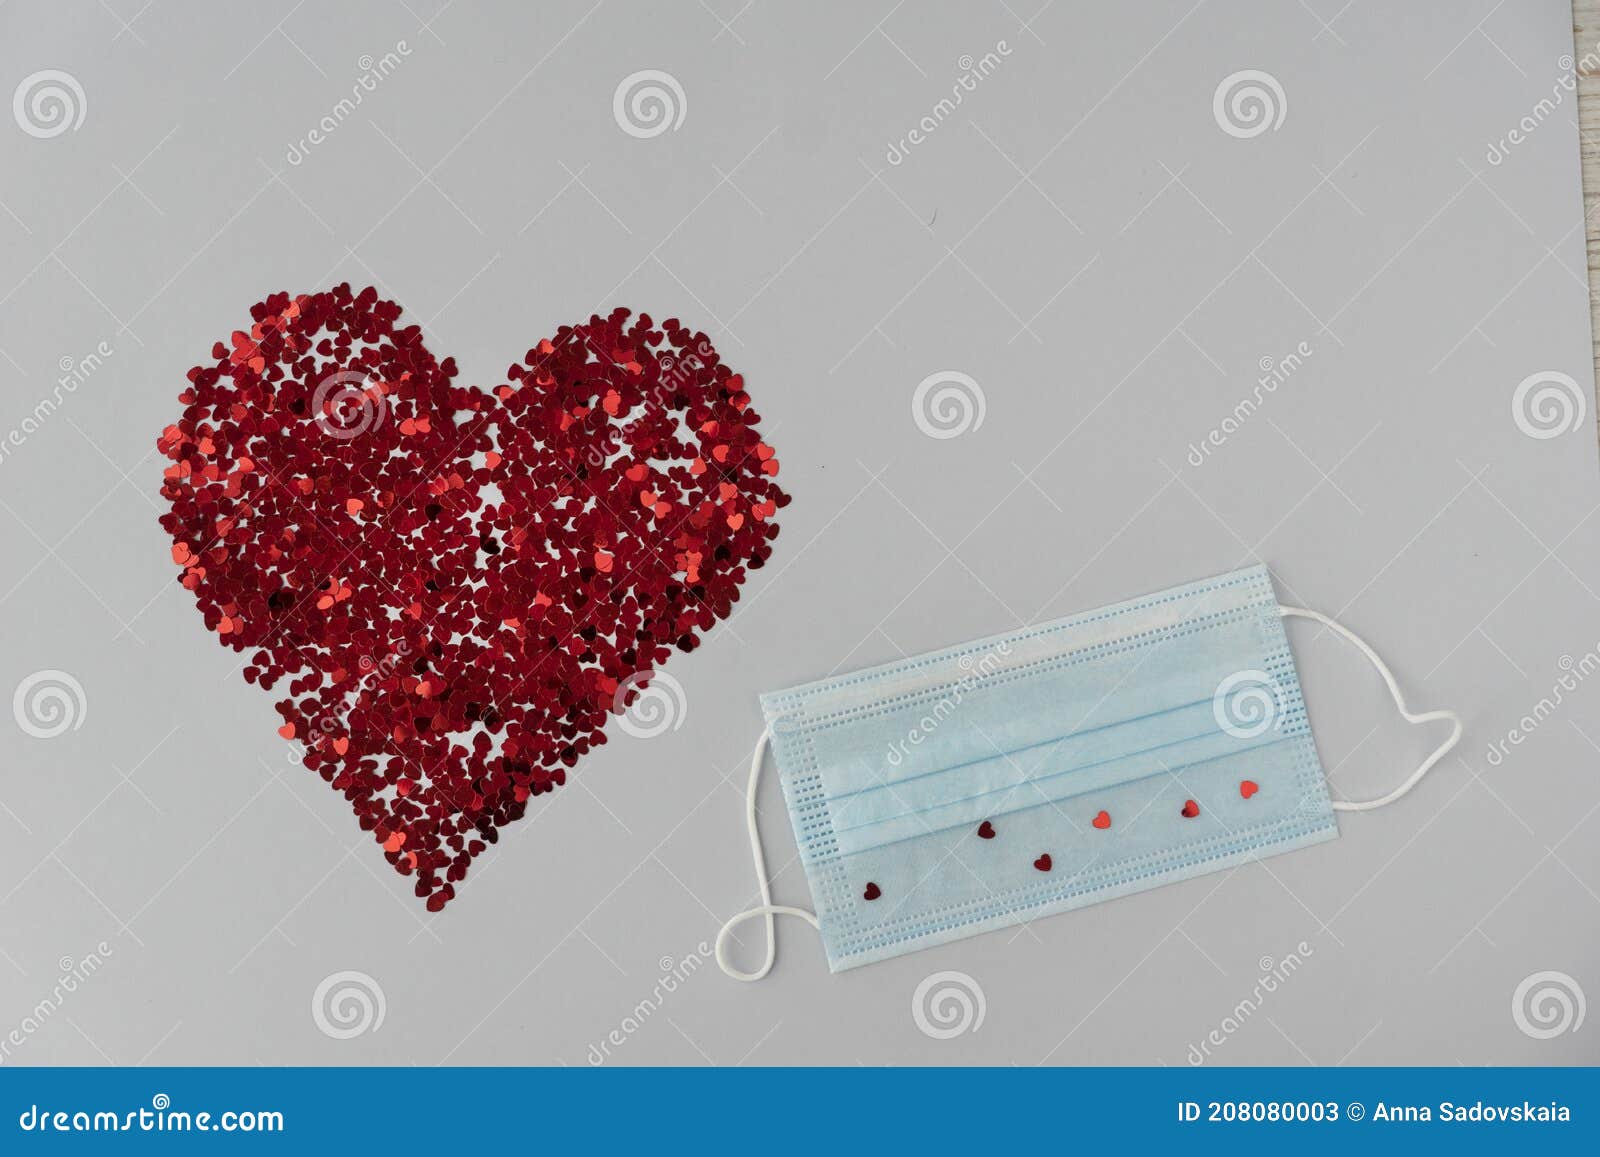 big red heart from little sparkling confeti and medical mask on light background.